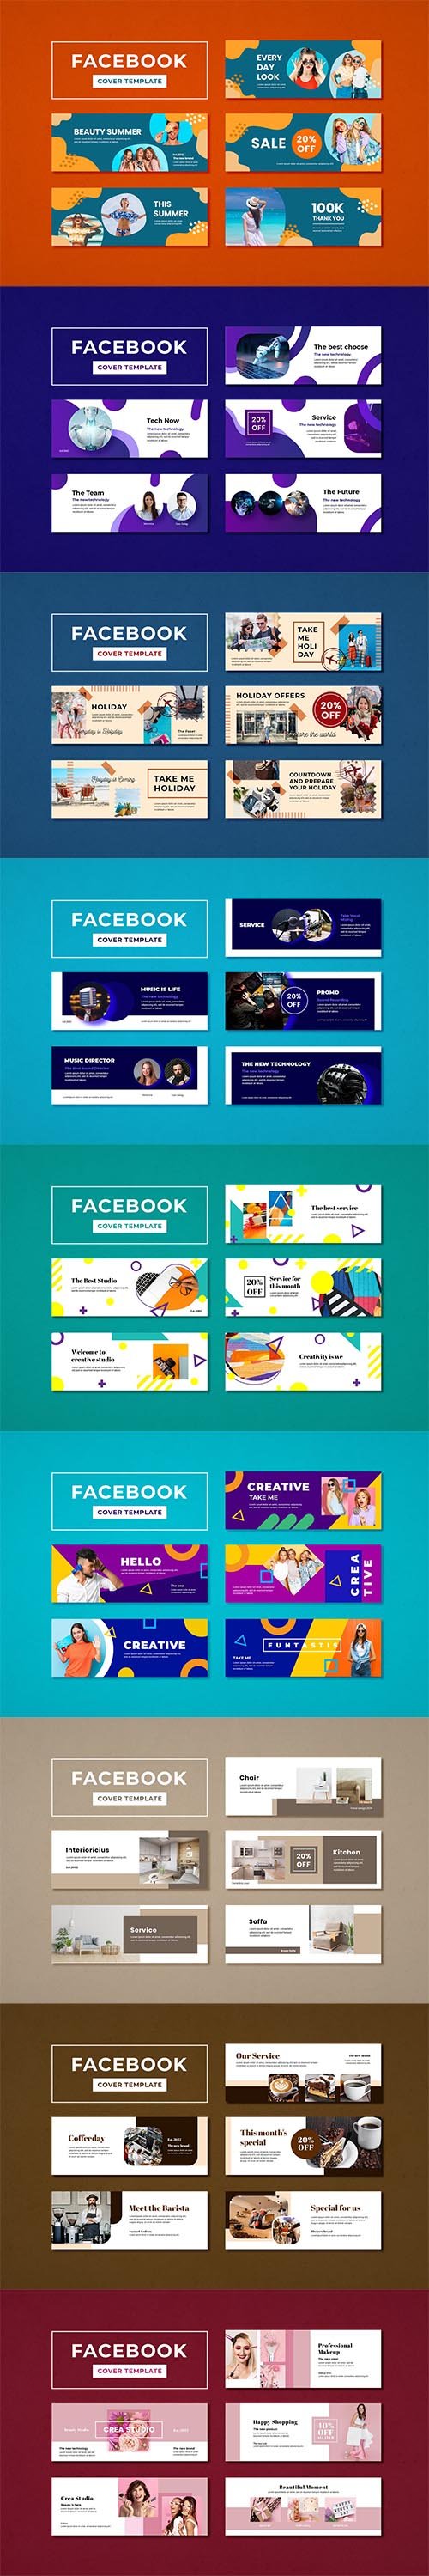 Facebook Covers Templates Pack PSD